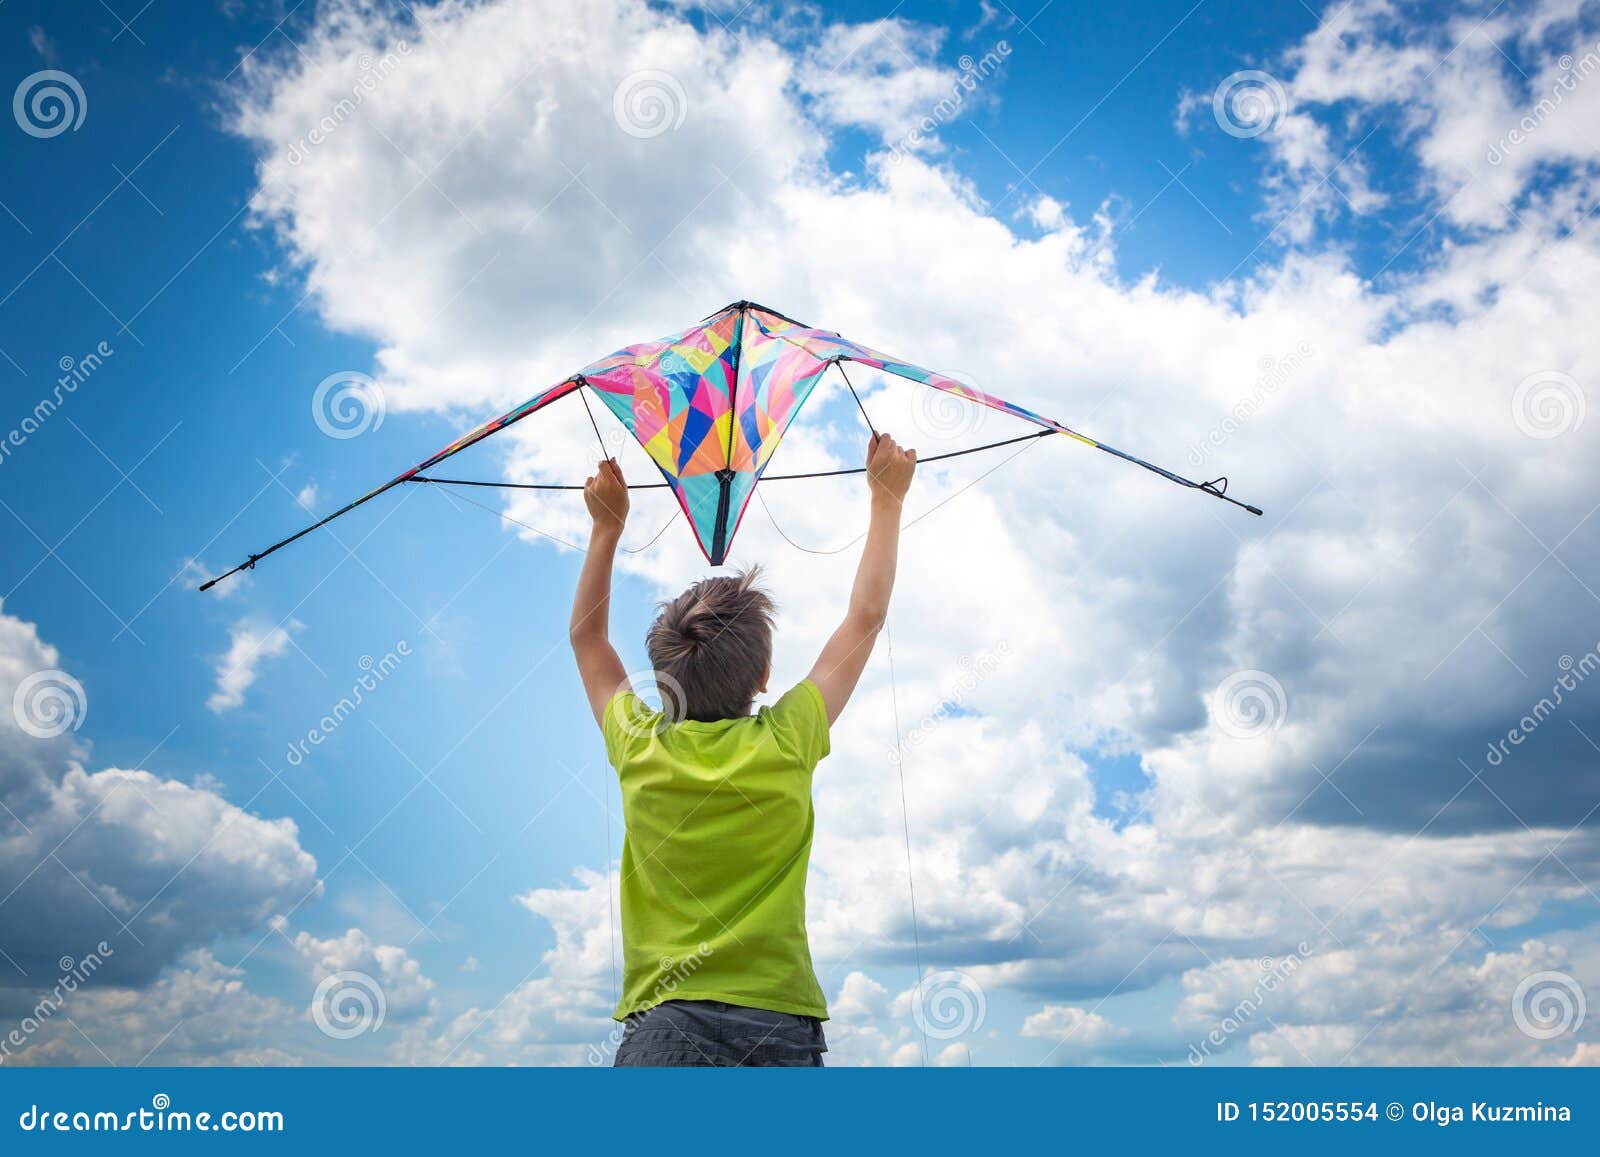 A Boy with a Colorful Kite in His Hands Against the Blue Sky with ...